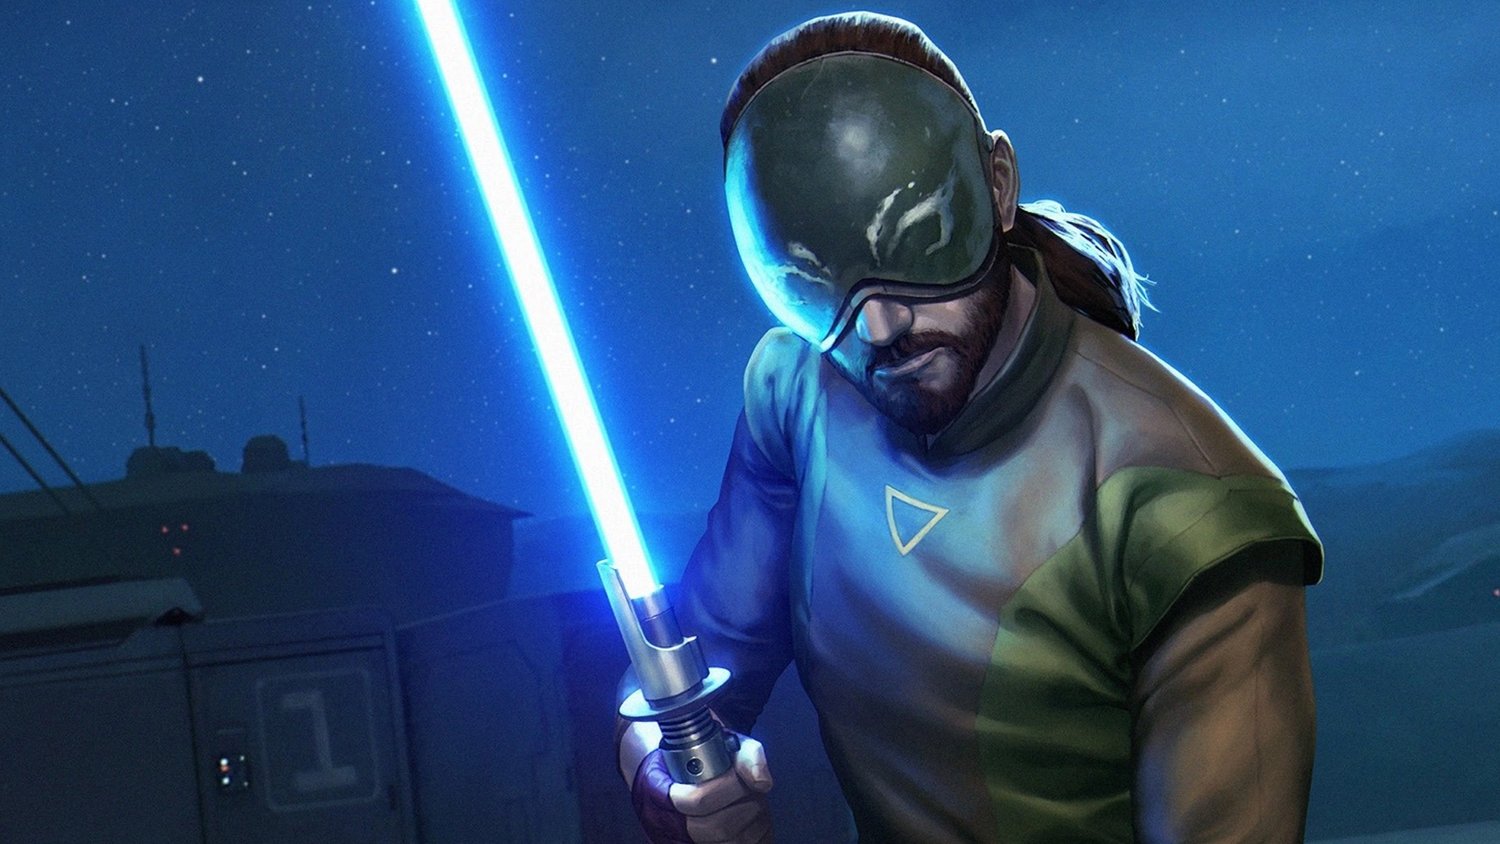 Will The STAR WARS Character Kanan Jarrus Make His Live-Action Debut? Freddie Prinze Jr. Says He's Done